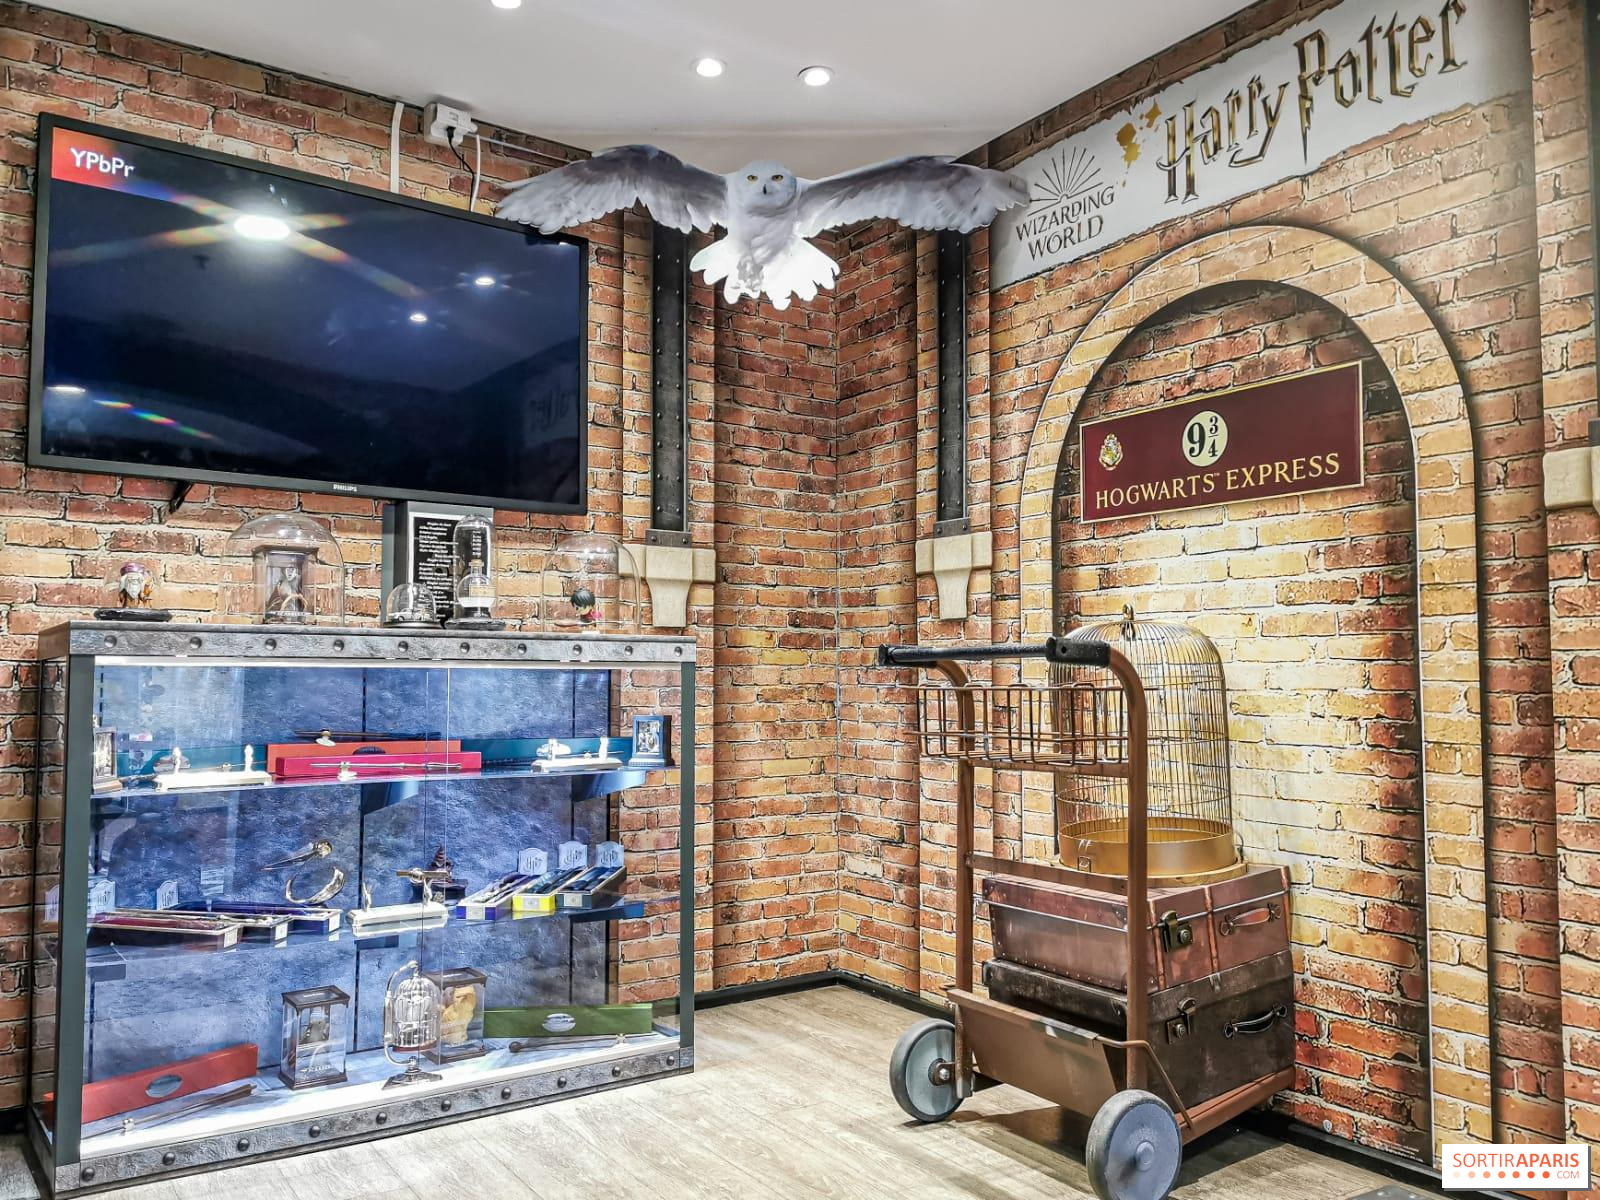 Harry Potter's Wizarding World store is back 